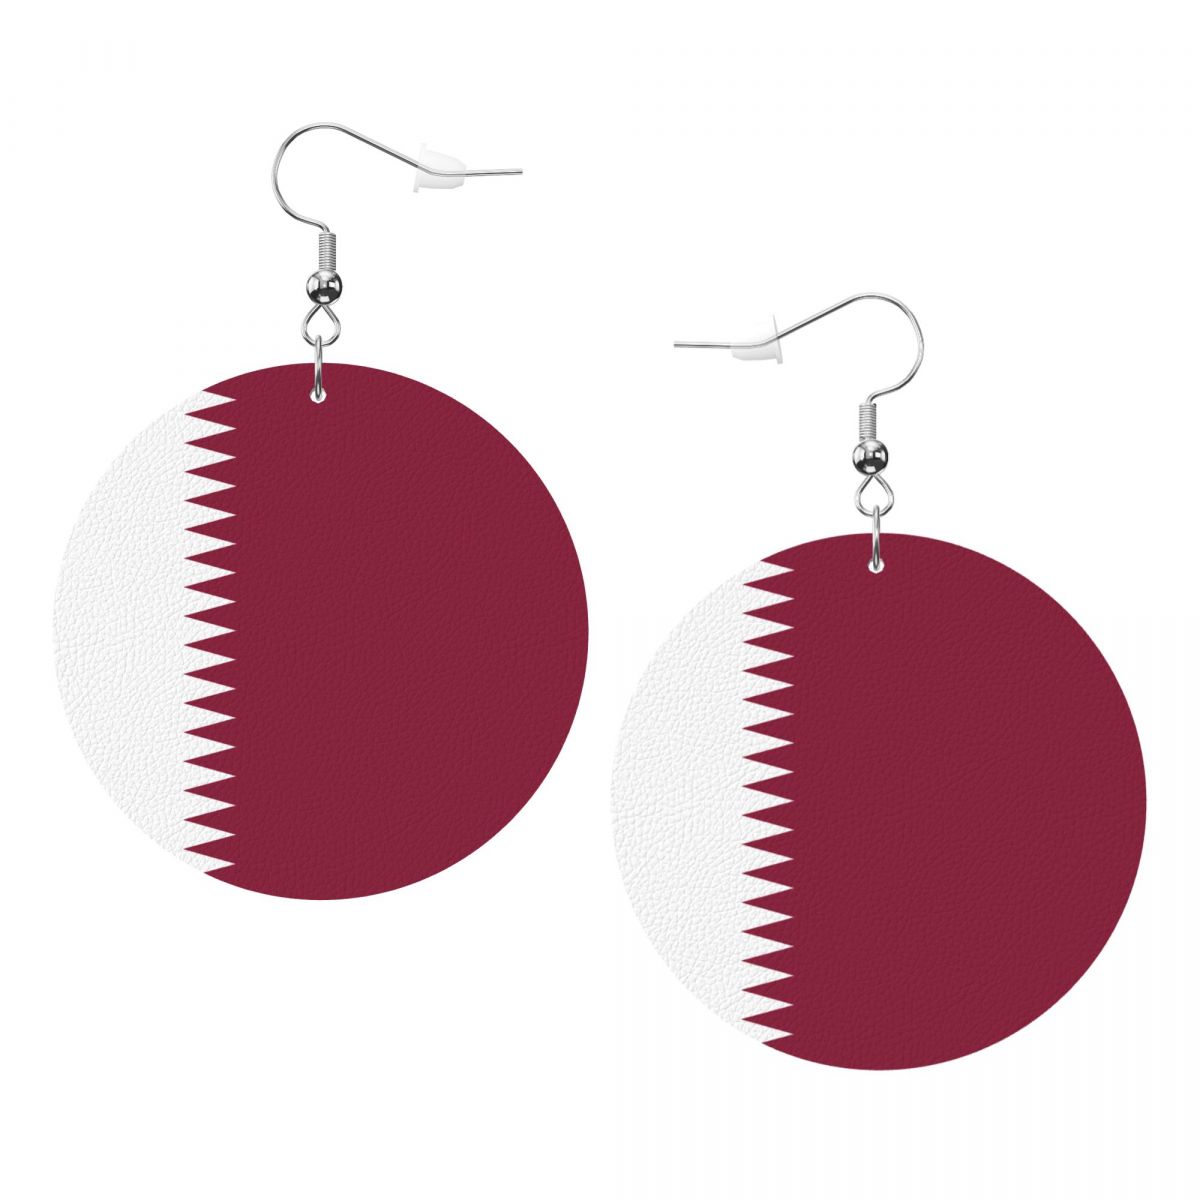 Qatar Flag Round Leather Dangle Earrings for Sport Ball Fans or Players